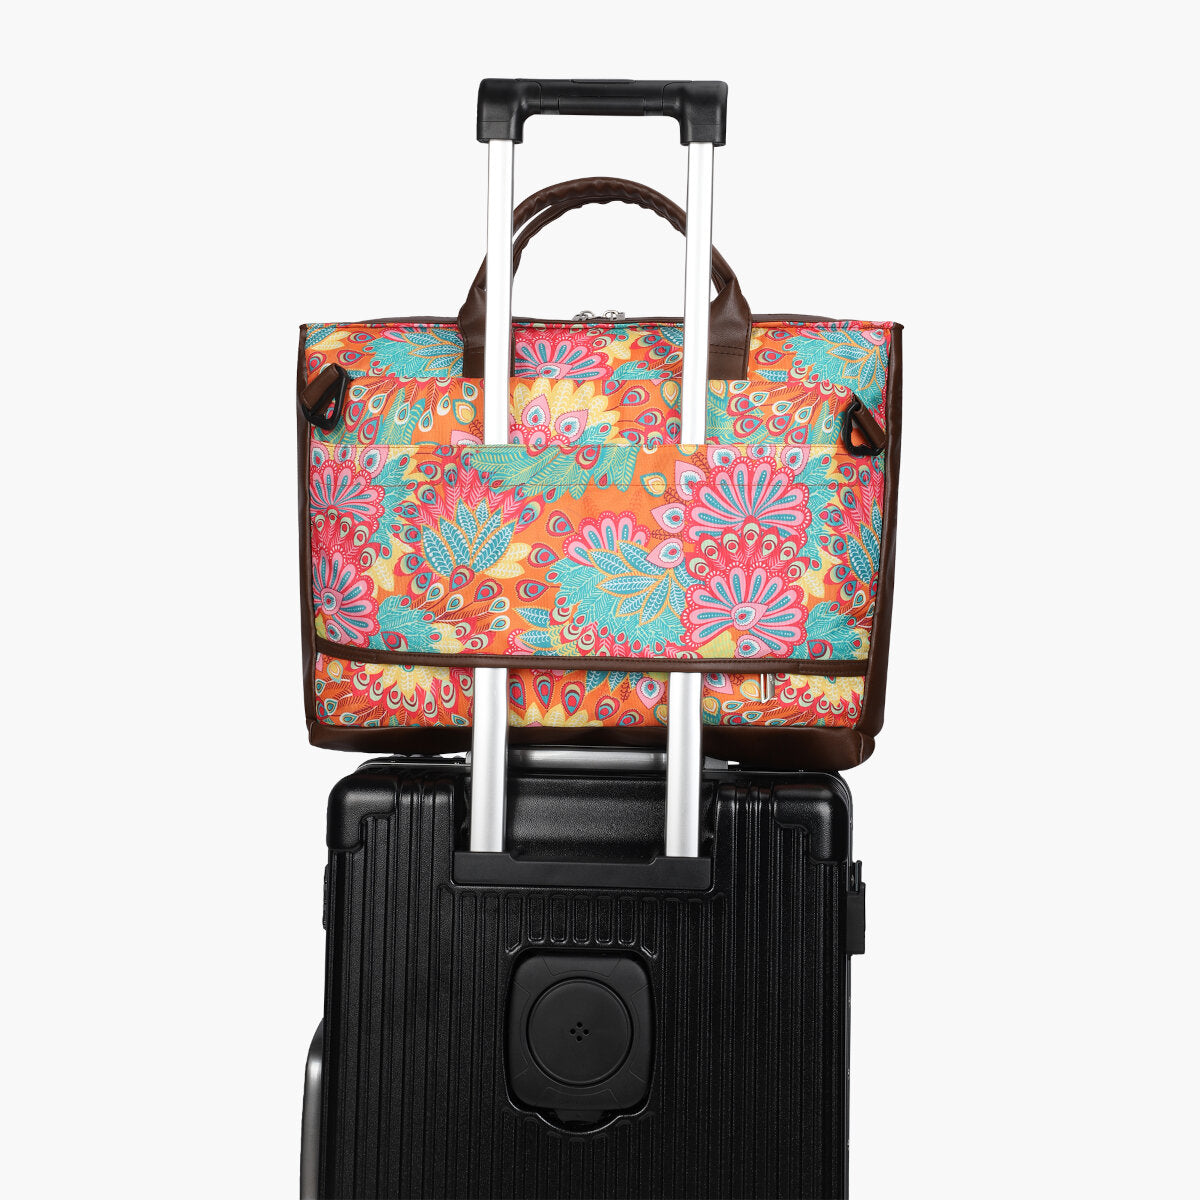 Paisley Print | Protecta Evenly Poised Office Laptop Bag for Women - 8